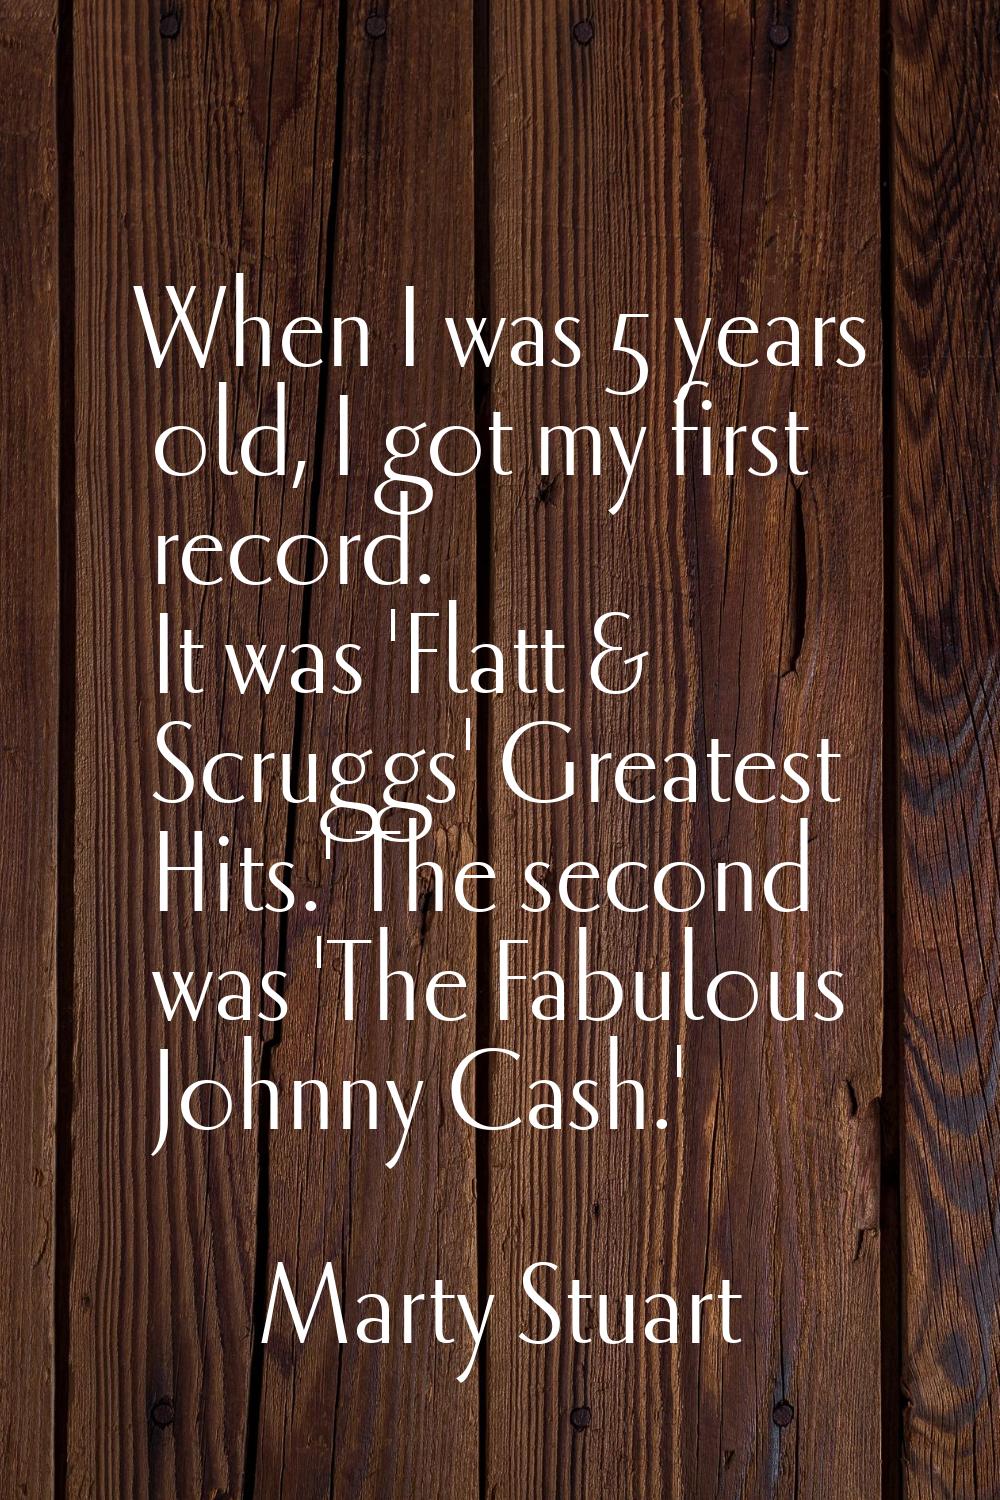 When I was 5 years old, I got my first record. It was 'Flatt & Scruggs' Greatest Hits.' The second 